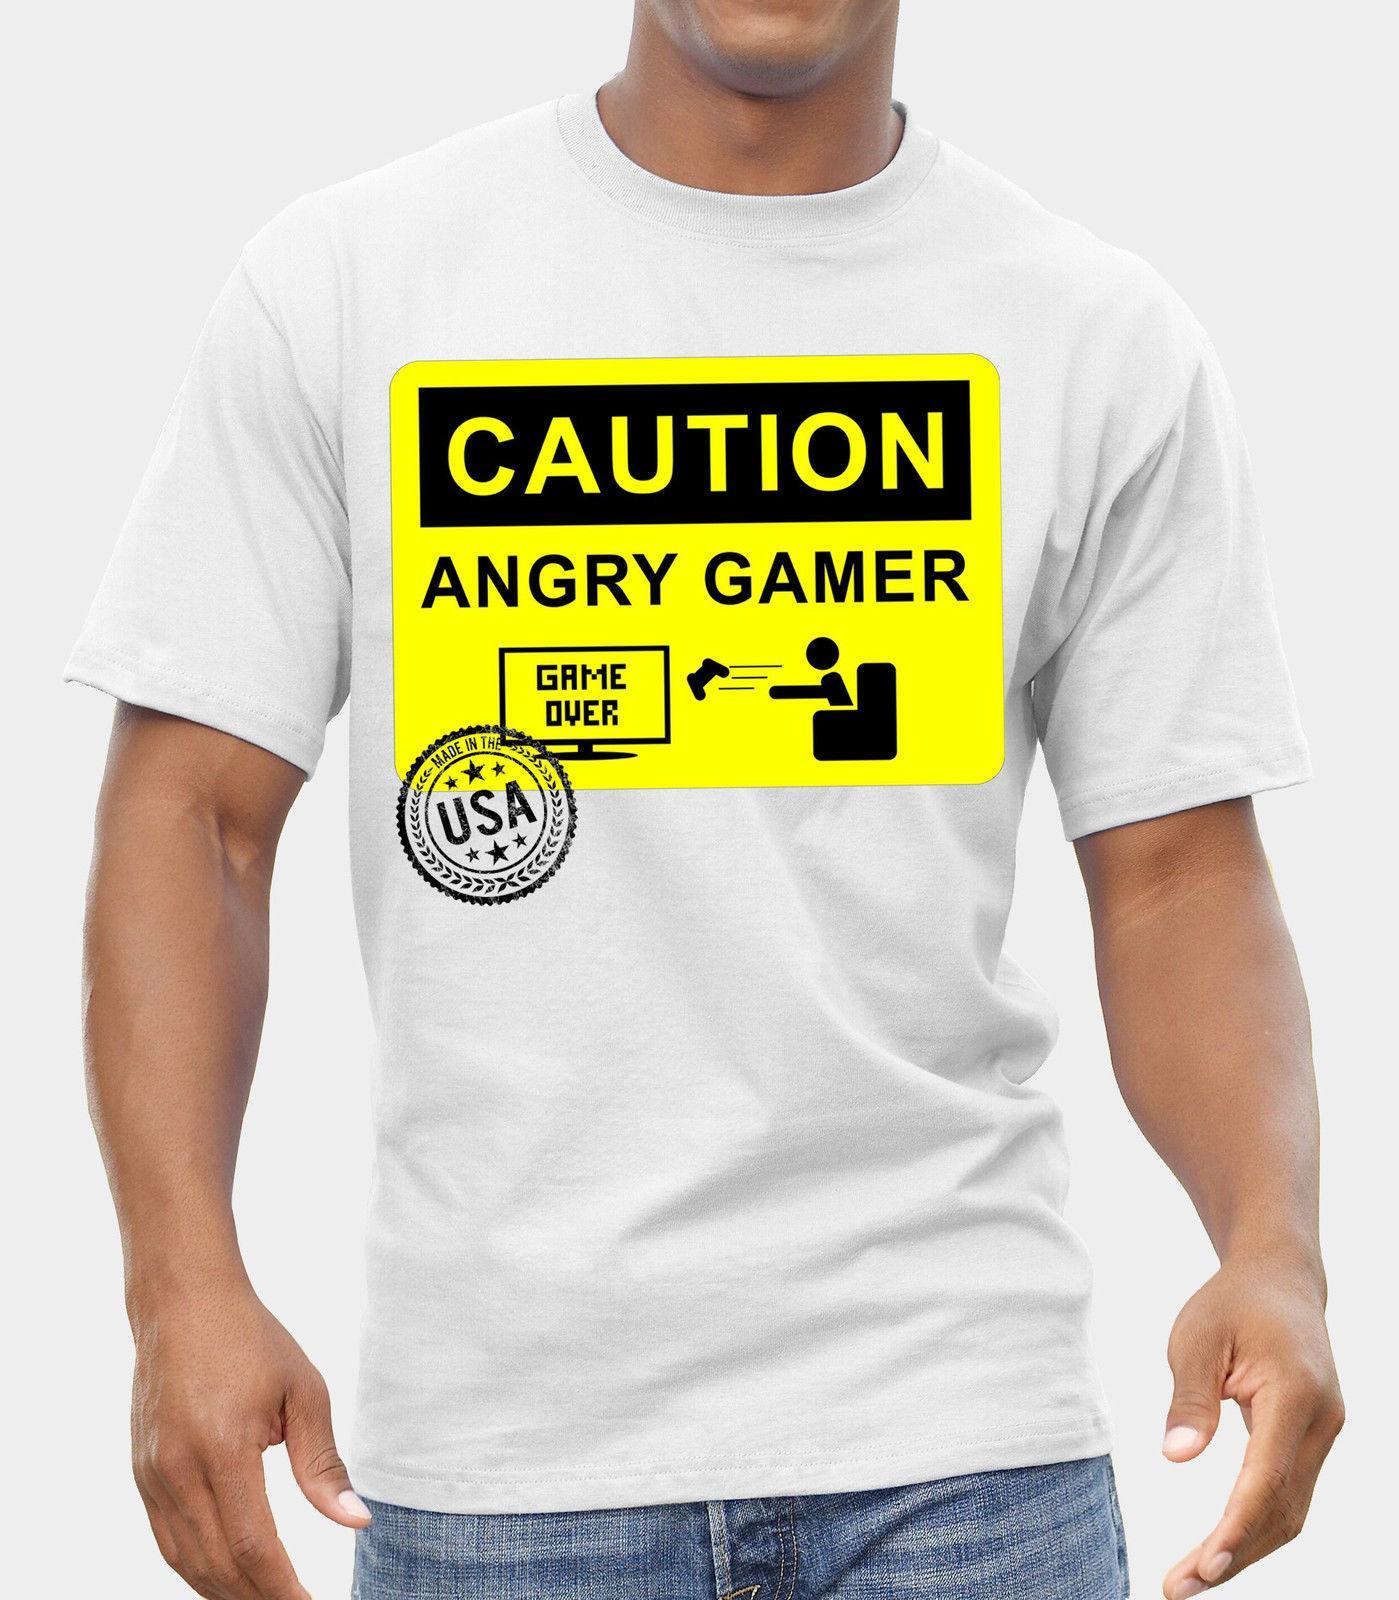 Angry Gamer Logo - Caution Angry Gamers LOGO T Shirt Oldschool Vintage FRUIT OF THE